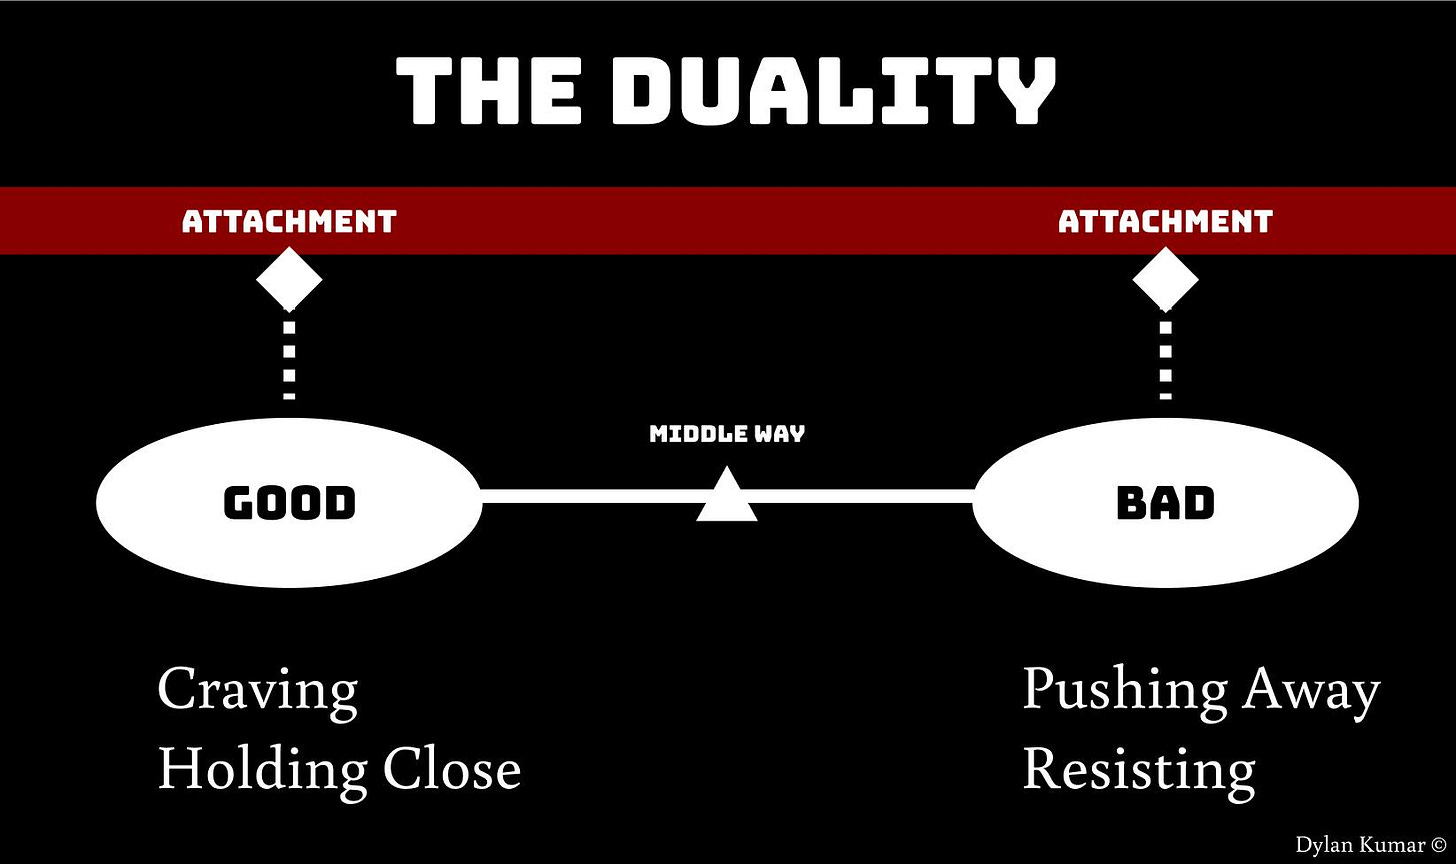 May be a graphic of text that says "THE DUALITY ATTACHMENT ATTACHMENT GOOD MIDDLE MIDLEWAY WAY BAD Craving Holding Close Pushing Away Resisting Kumar"